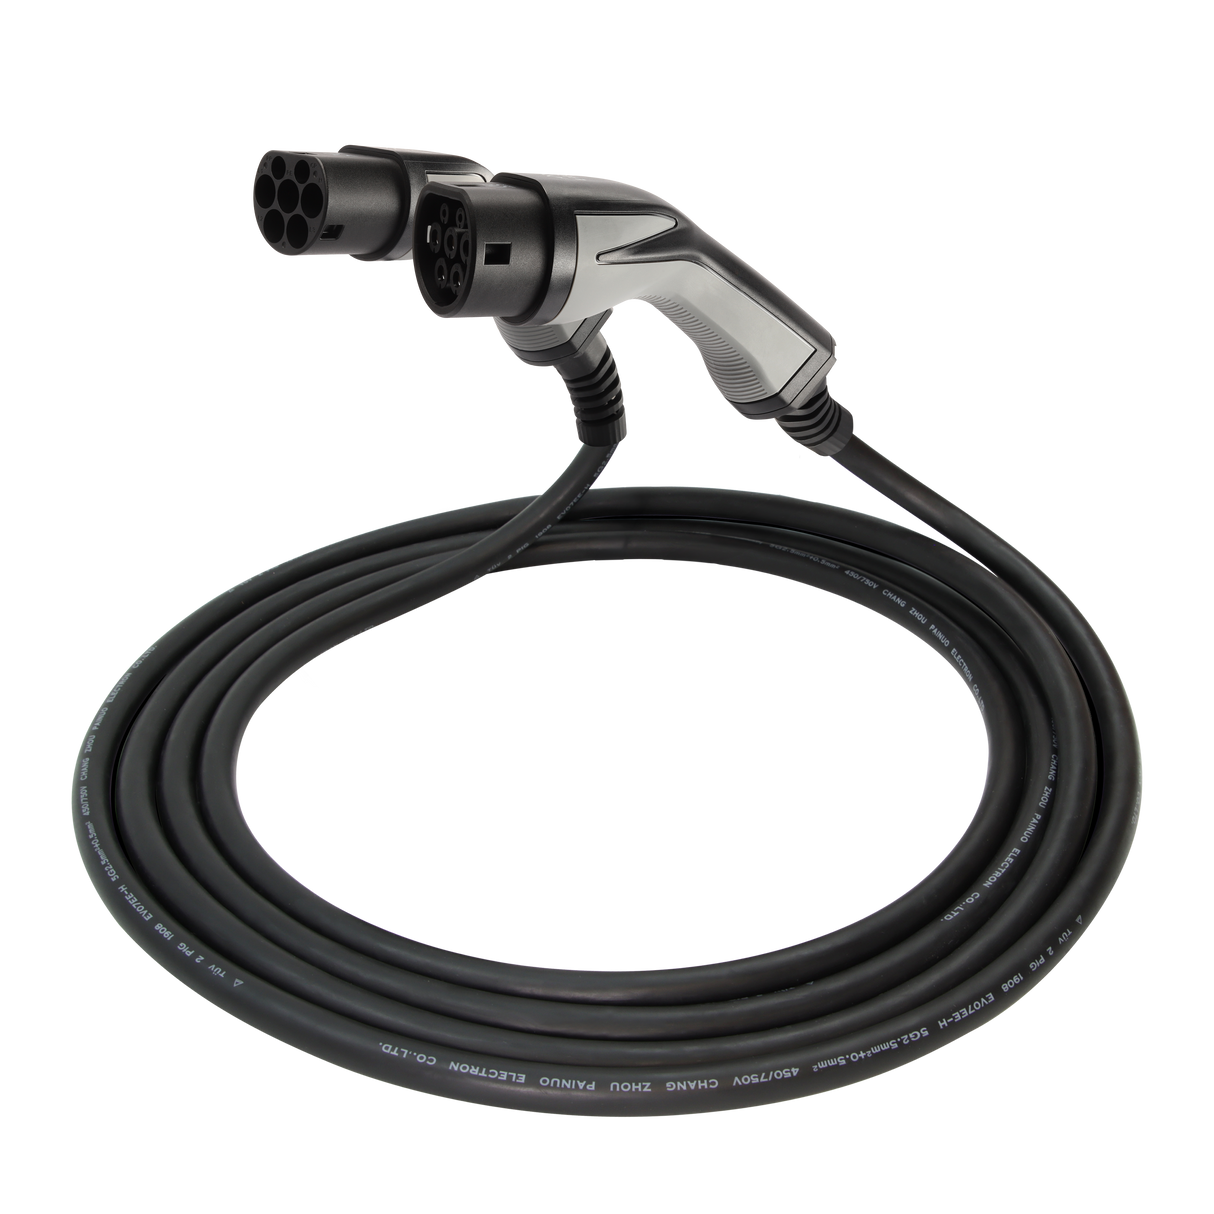 Charging cable Polestar 4 - Erock Pro Type 2 - 16A 3 phase (11 kW)